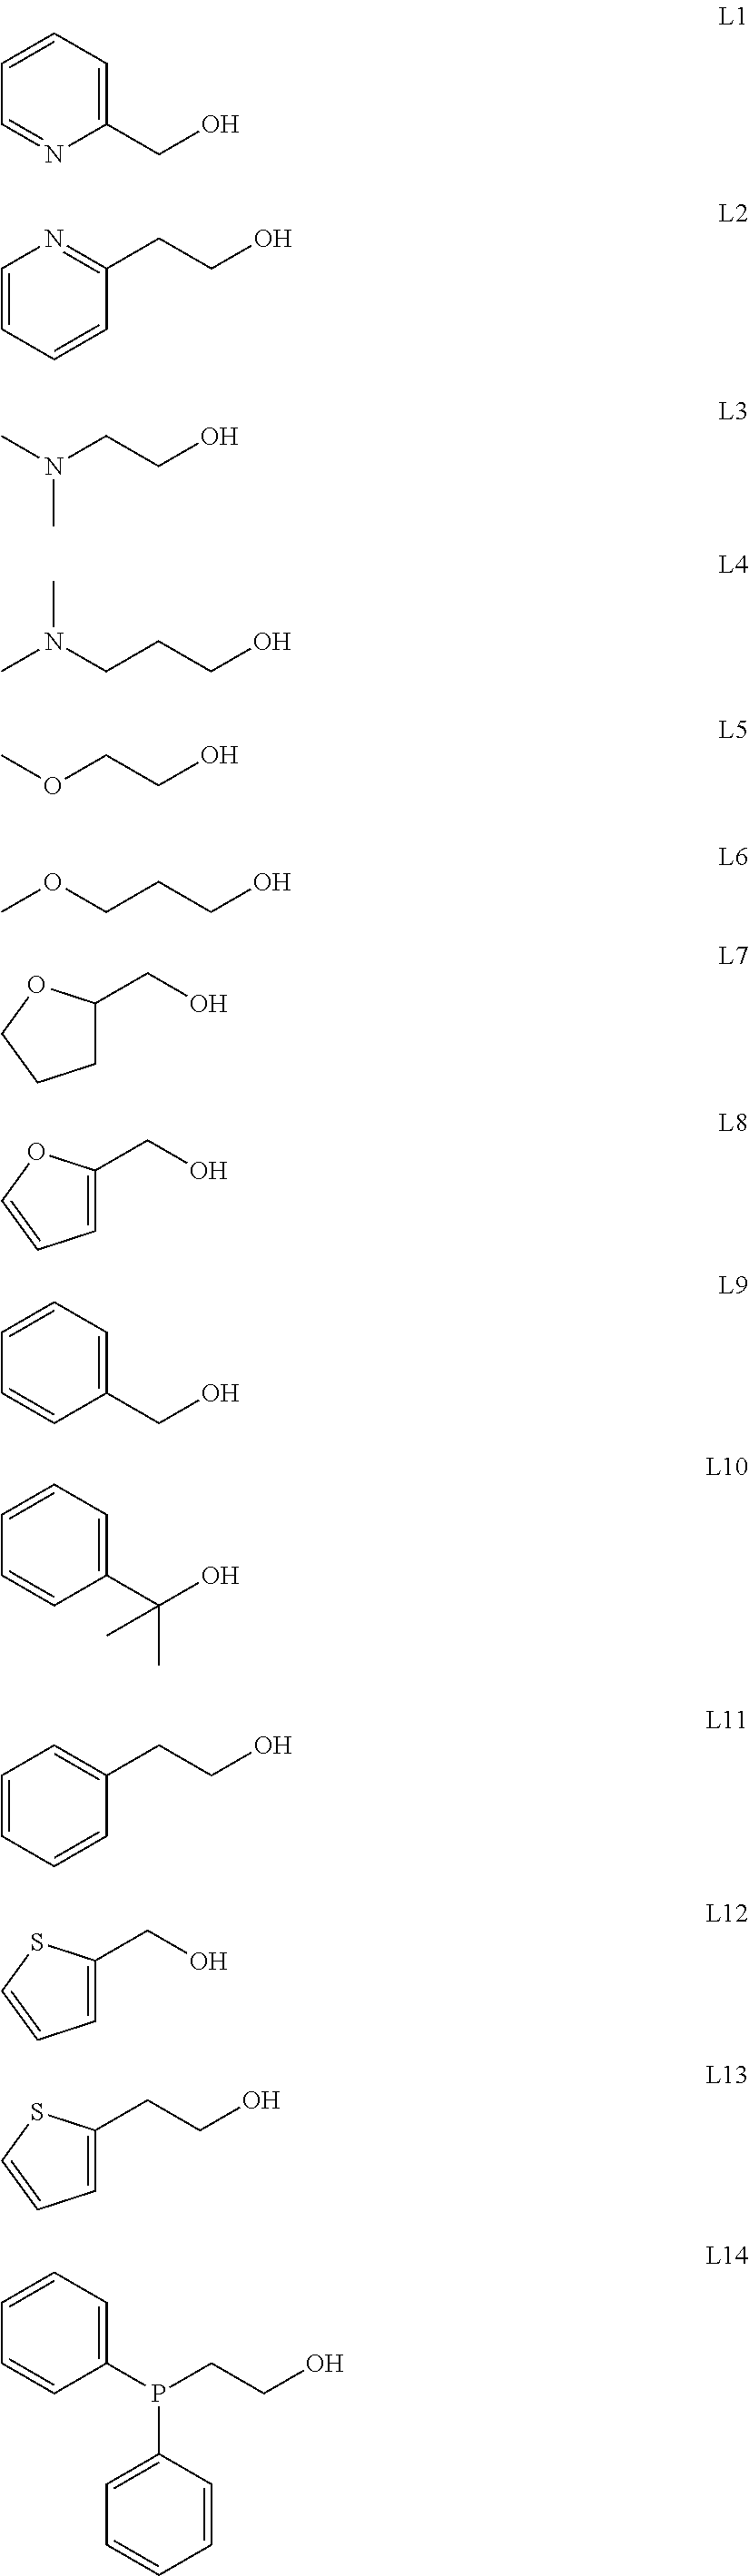 Process for dimerization of ethylene to but-1-ene using a composition comprising a titanium-based complex and an alkoxy ligand functionalized by a heteroatom